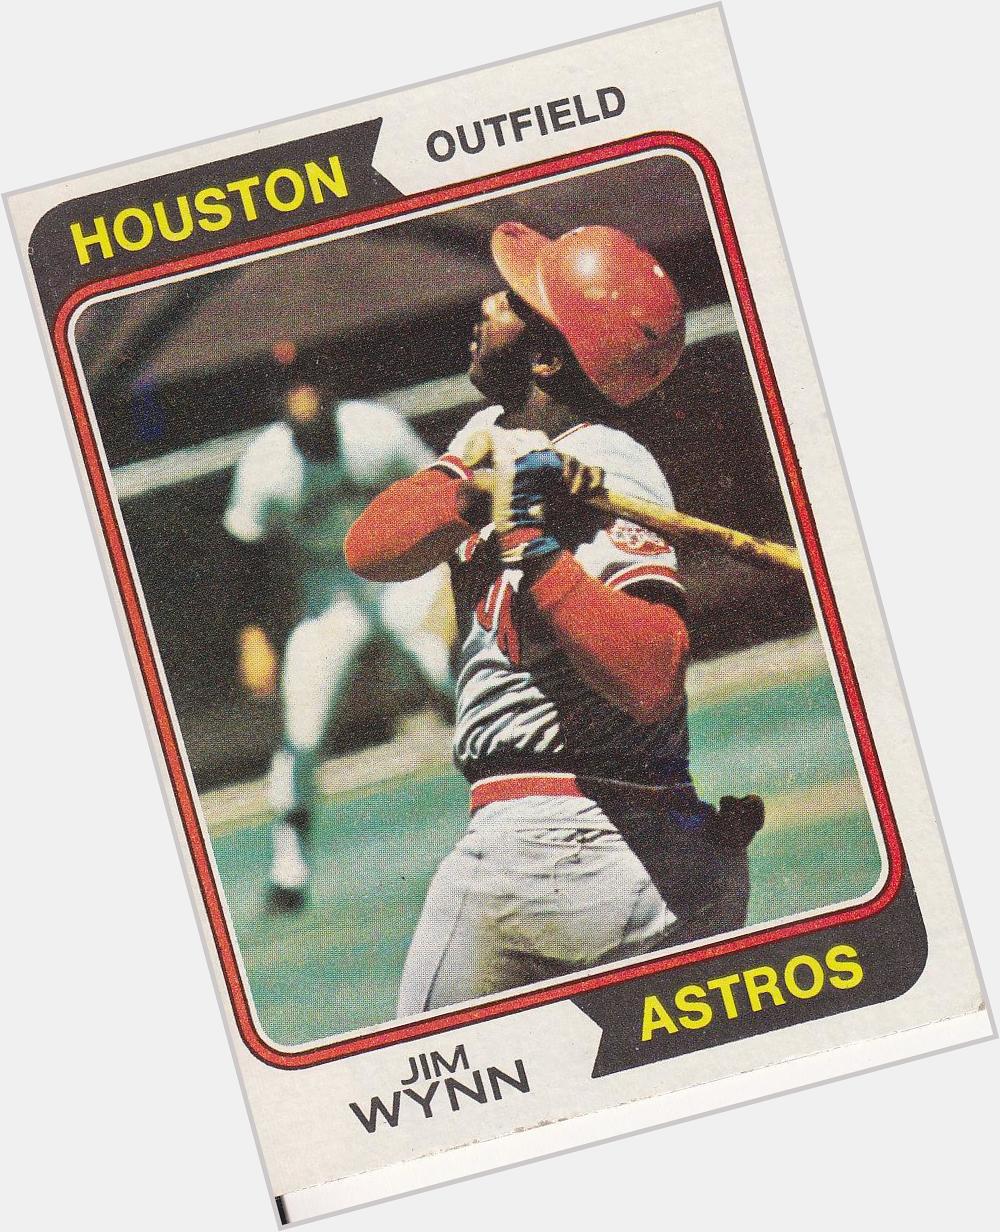 Happy Birthday Jimmy Wynn! The Toy Cannon is 73 today. He was a 3 time All-Star. 